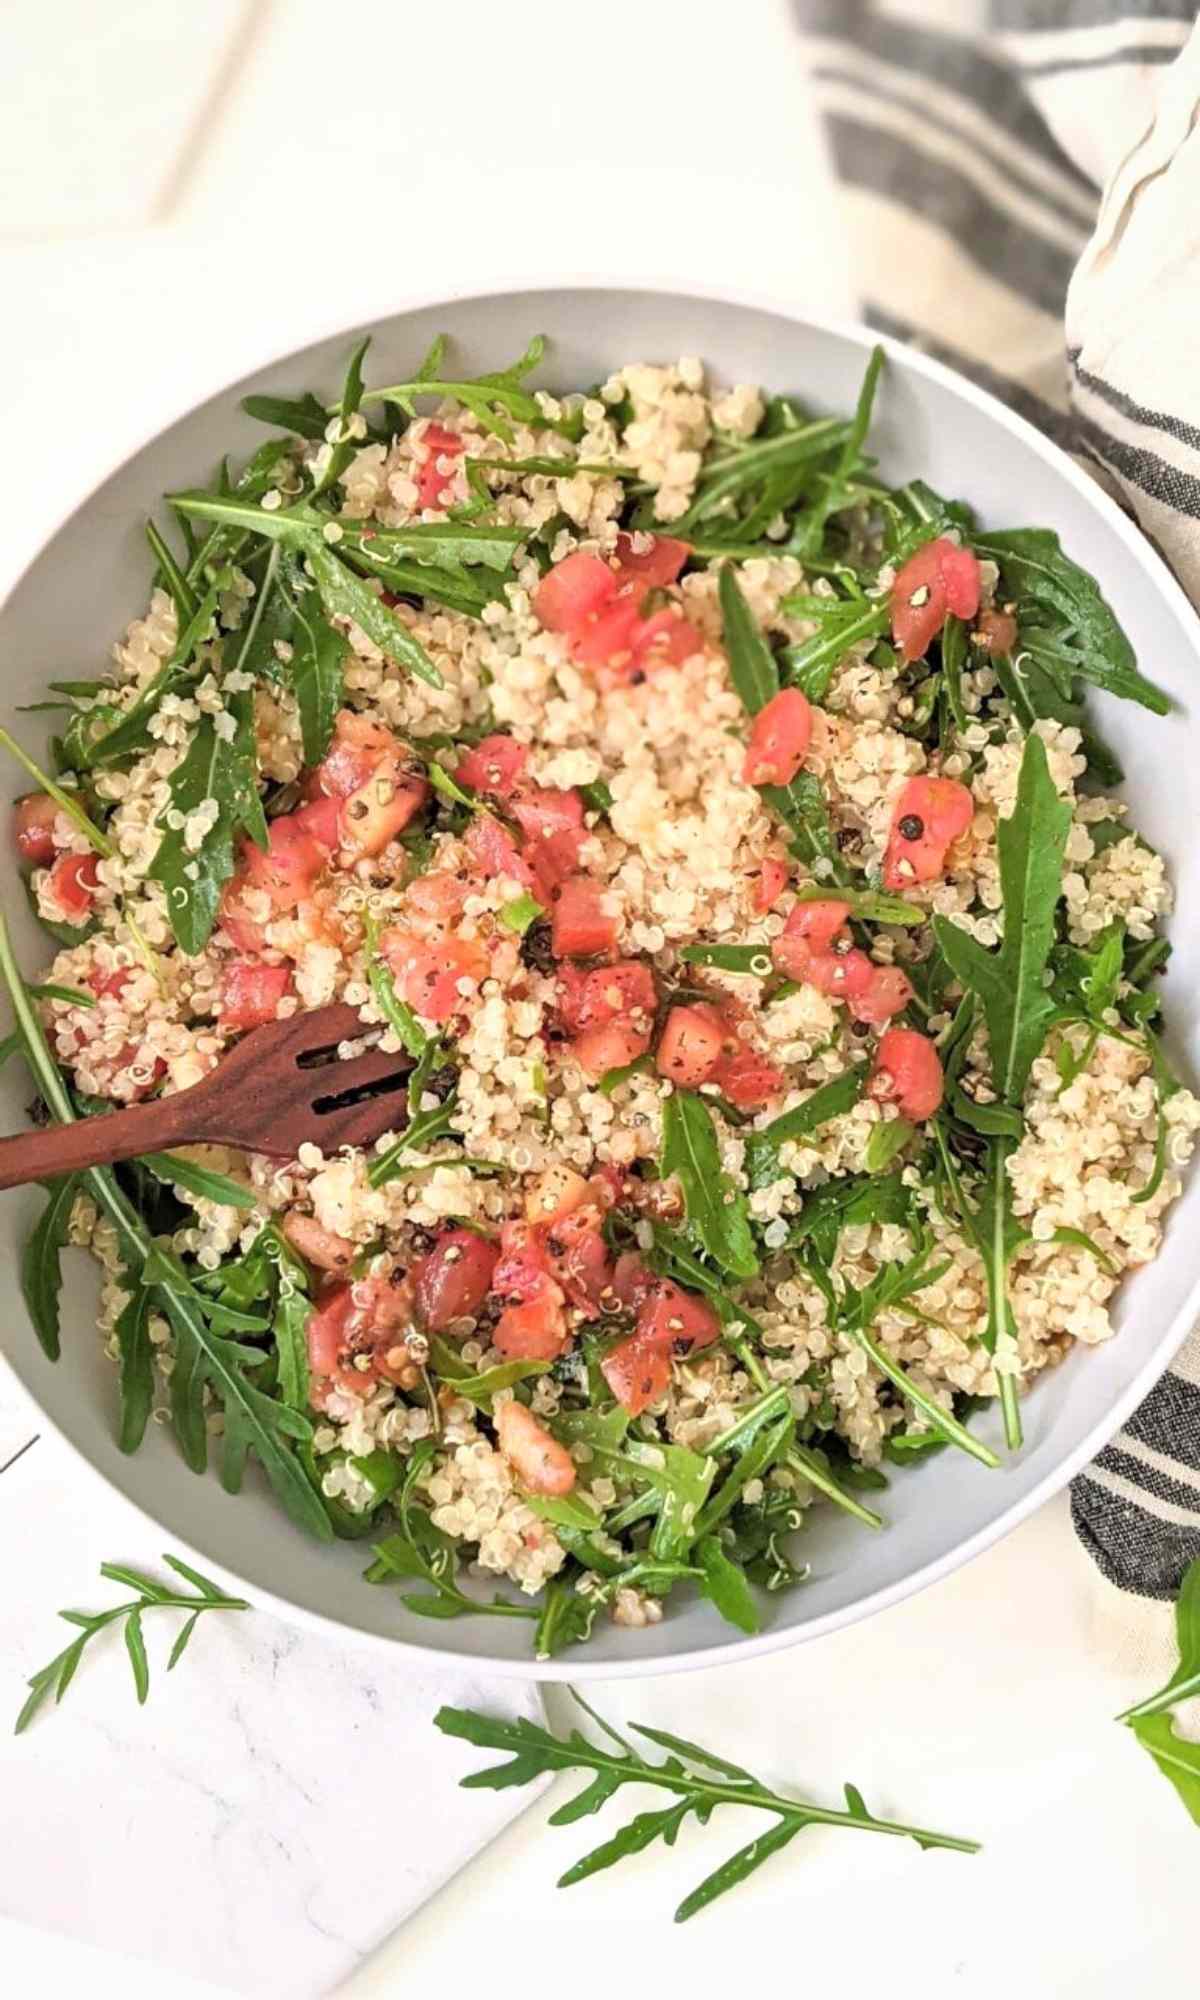 bruschetta salad recipes for lunch hearty quinoa salads high protein dairy free salad recipes for hot days meal prep salads